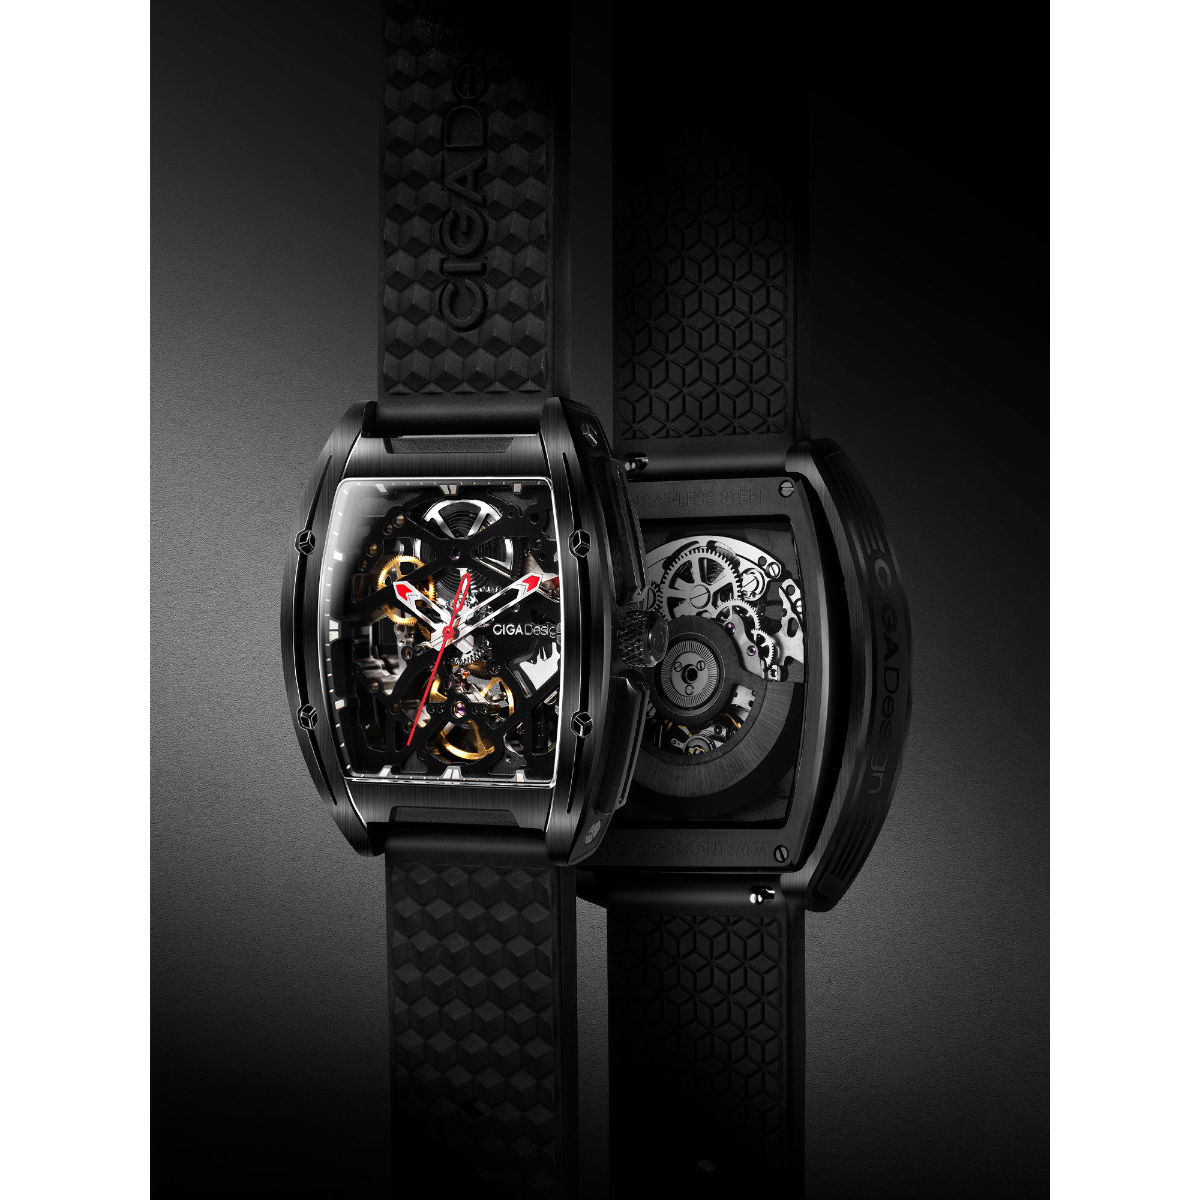 Amazon.com: CIGA Design Mechanical Automatic Watch X Series SUV Inspired  Anti-Shock Design Sapphire Crystal Analog Skeleton Watches with Silicone  and Nylon Strap for Men and Women (Black&Orange) : Clothing, Shoes & Jewelry